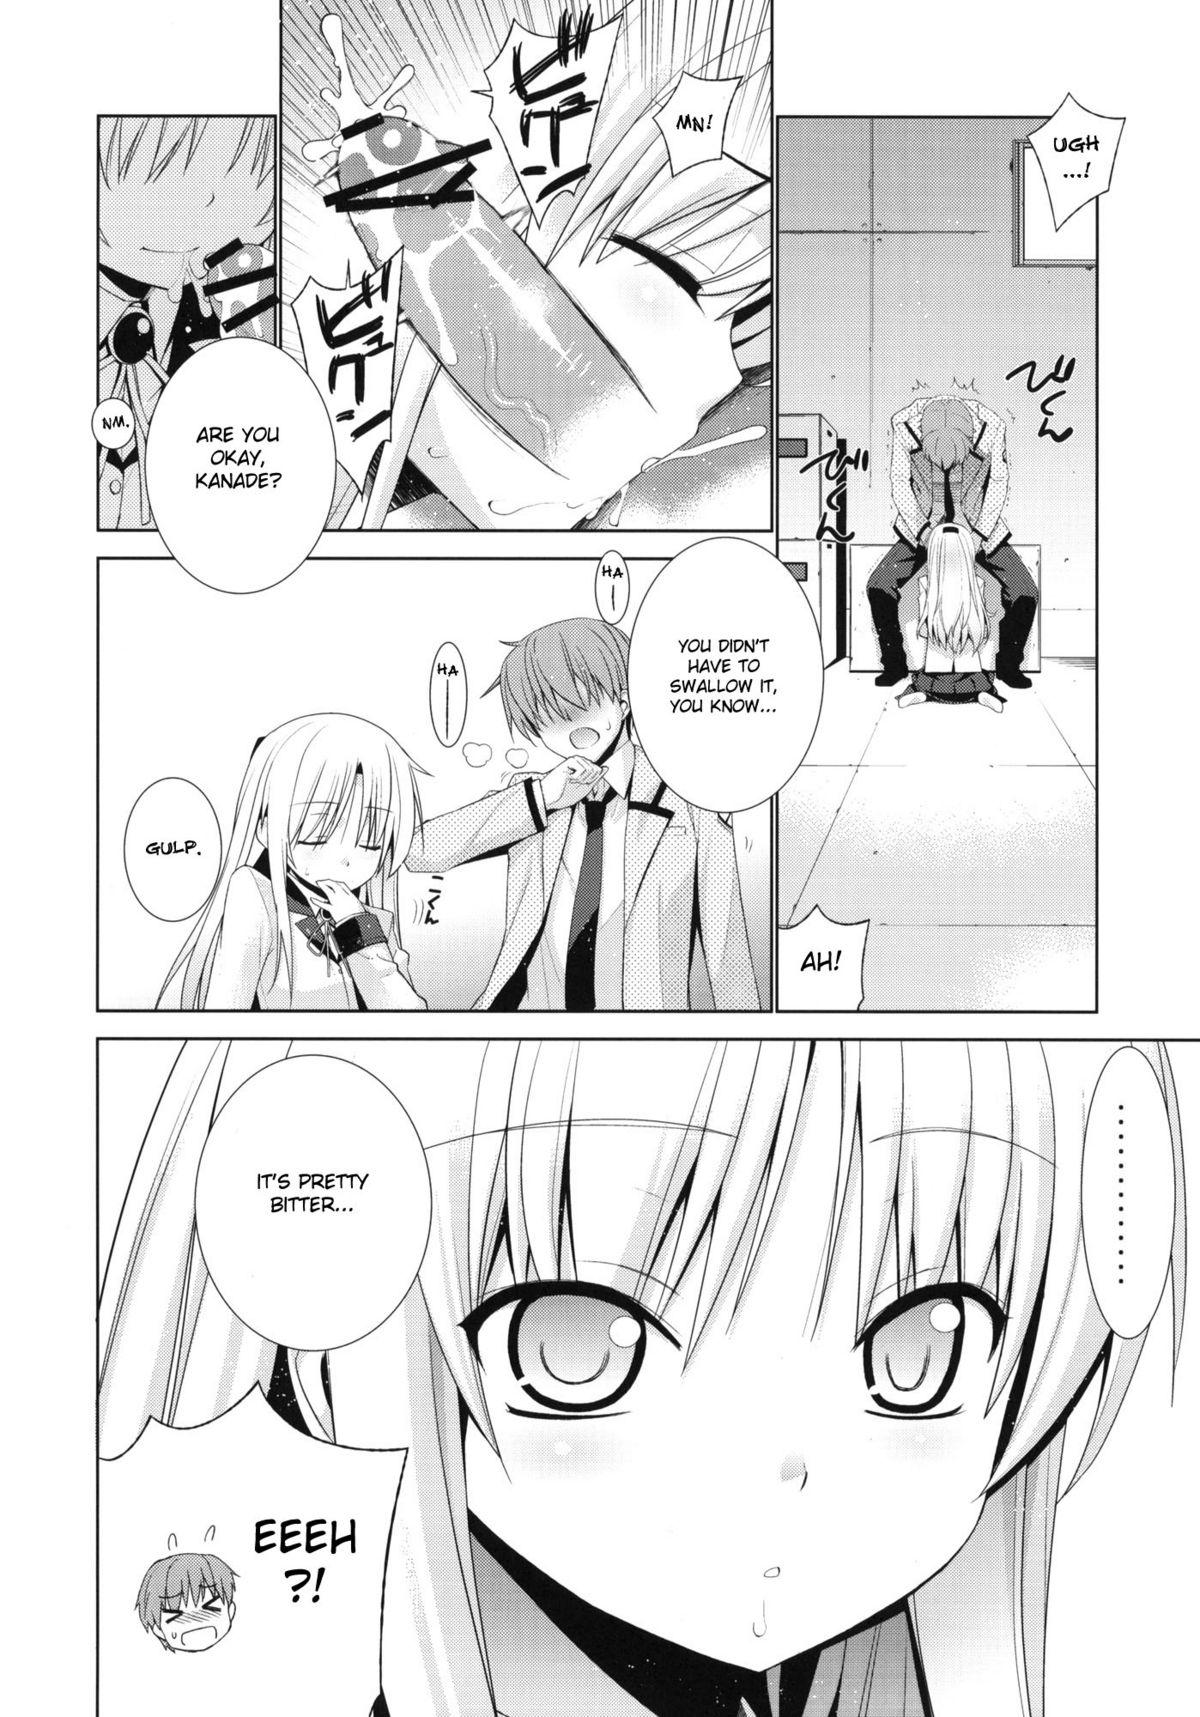 Missionary Angel Days - Angel beats Gay Sex - Page 5